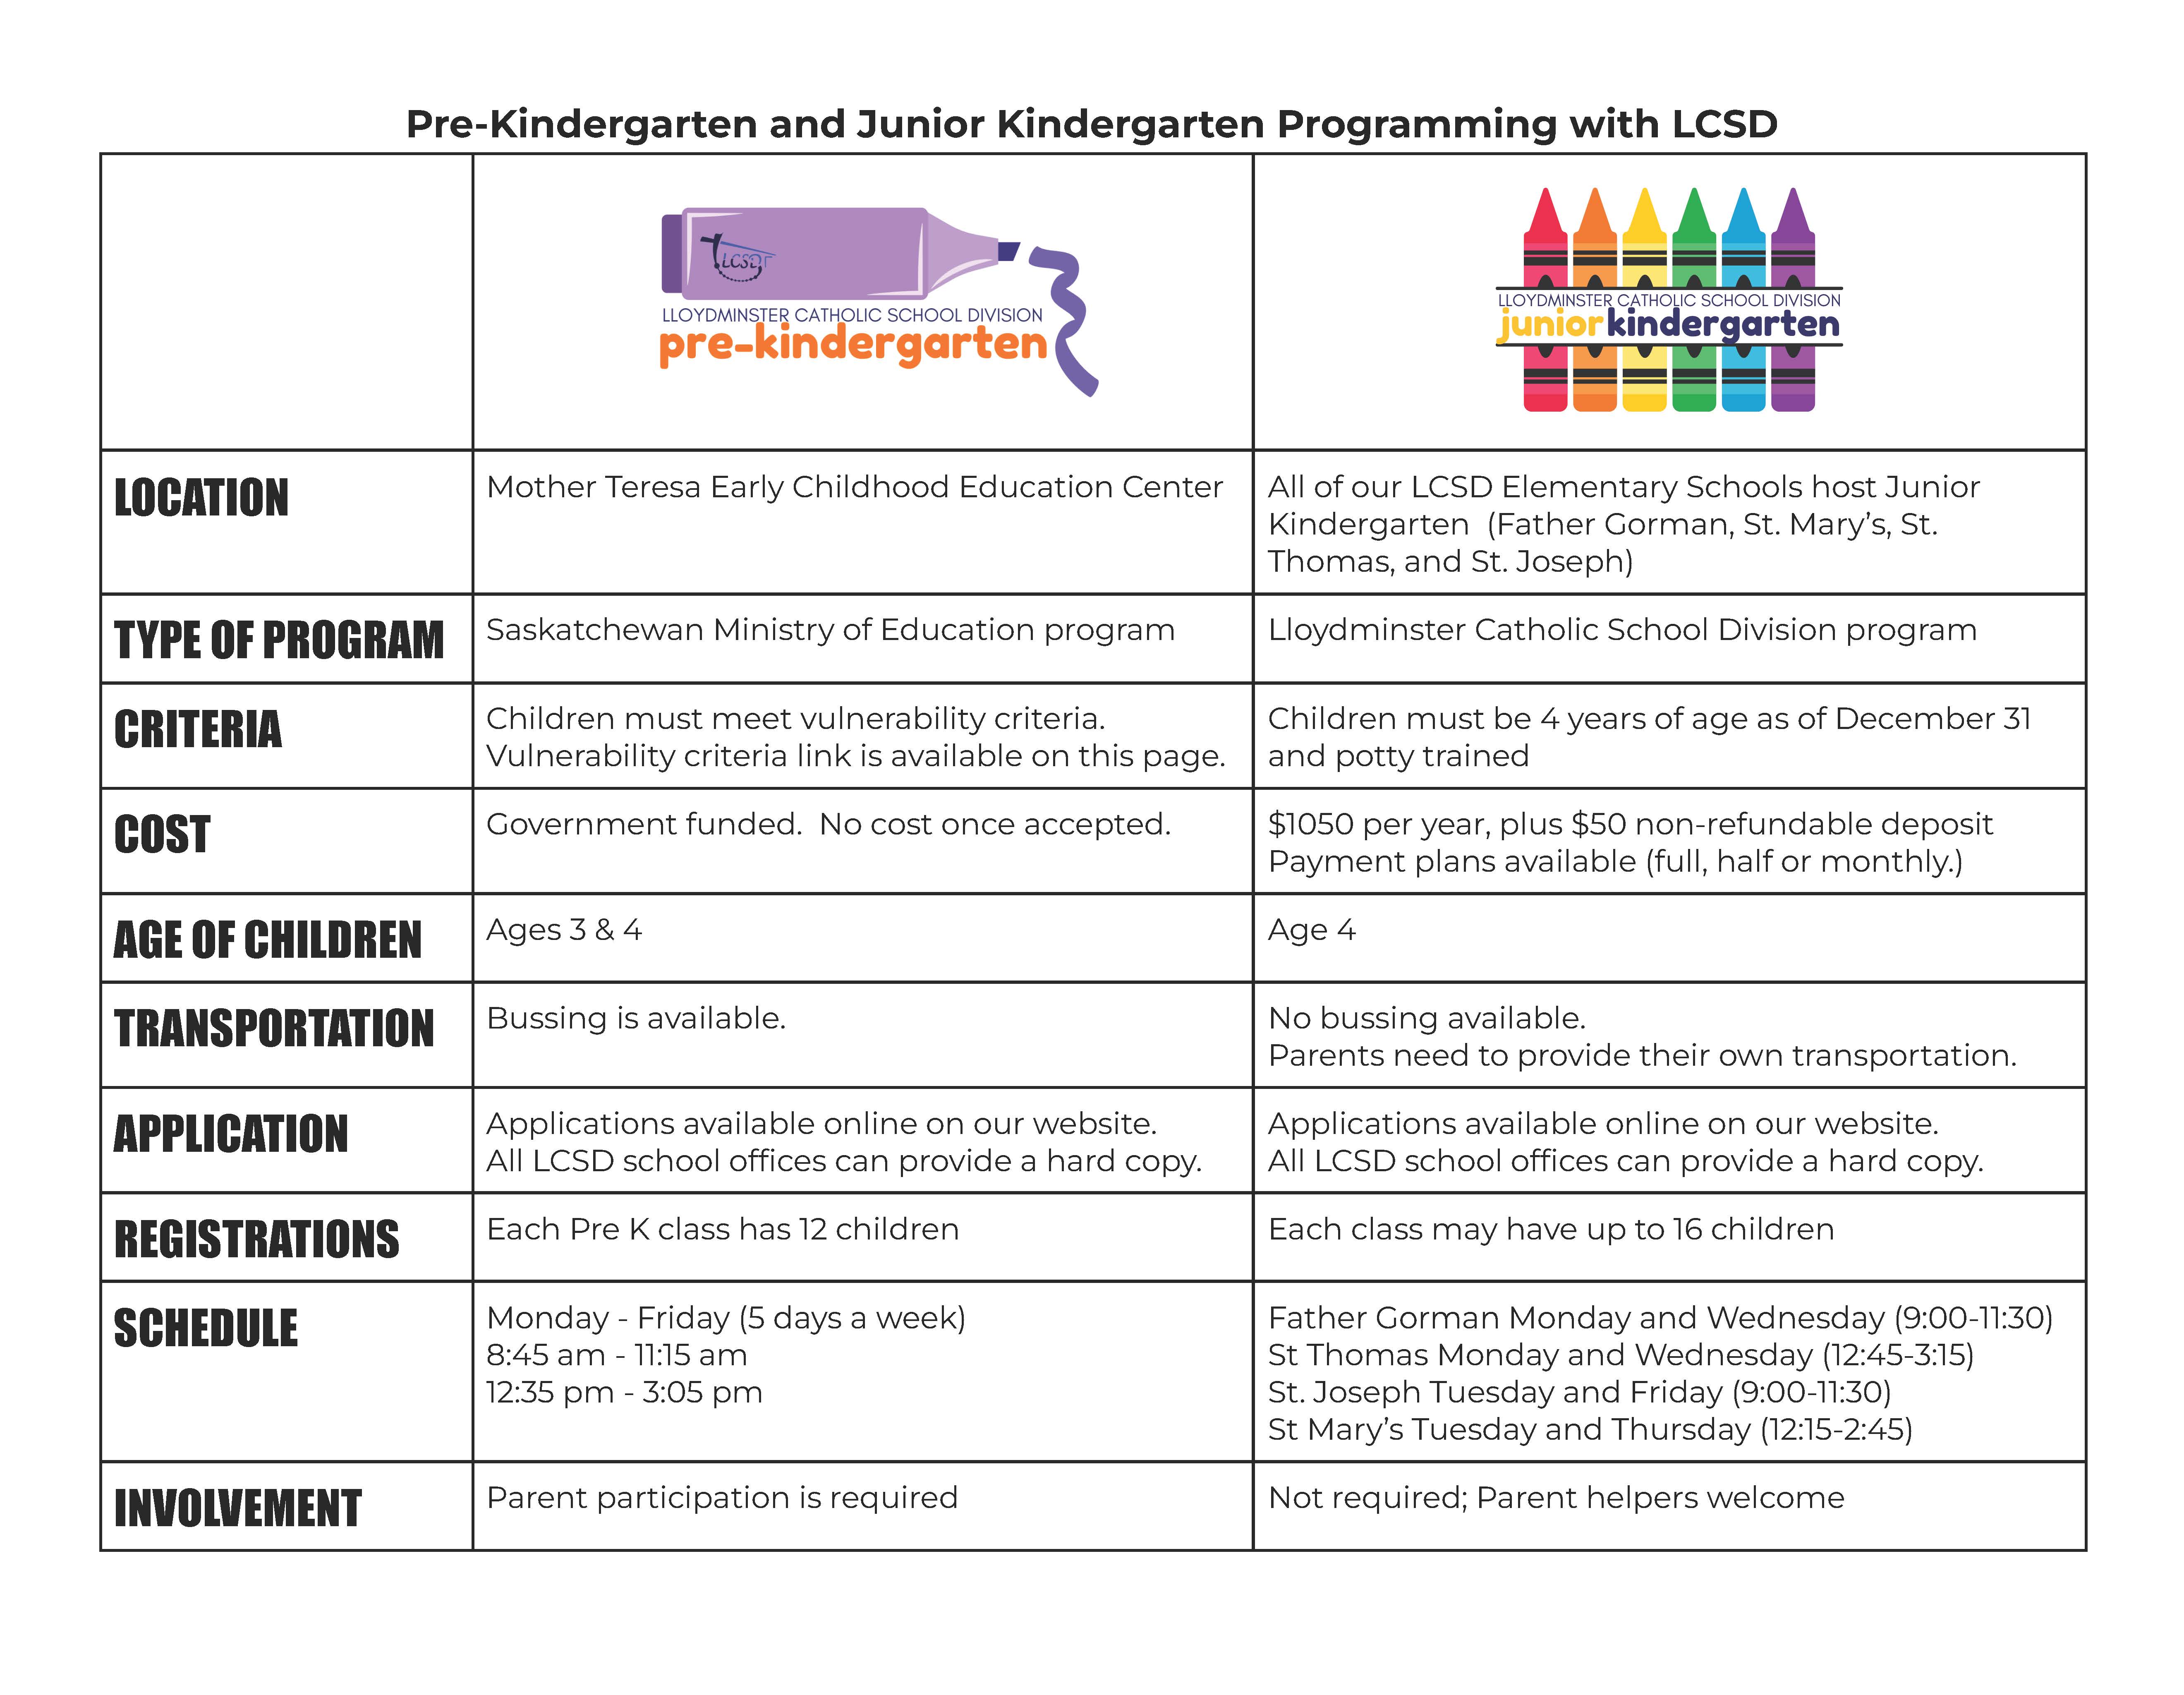 Advantages and MORE INFORMATION of Junior K and Pre K